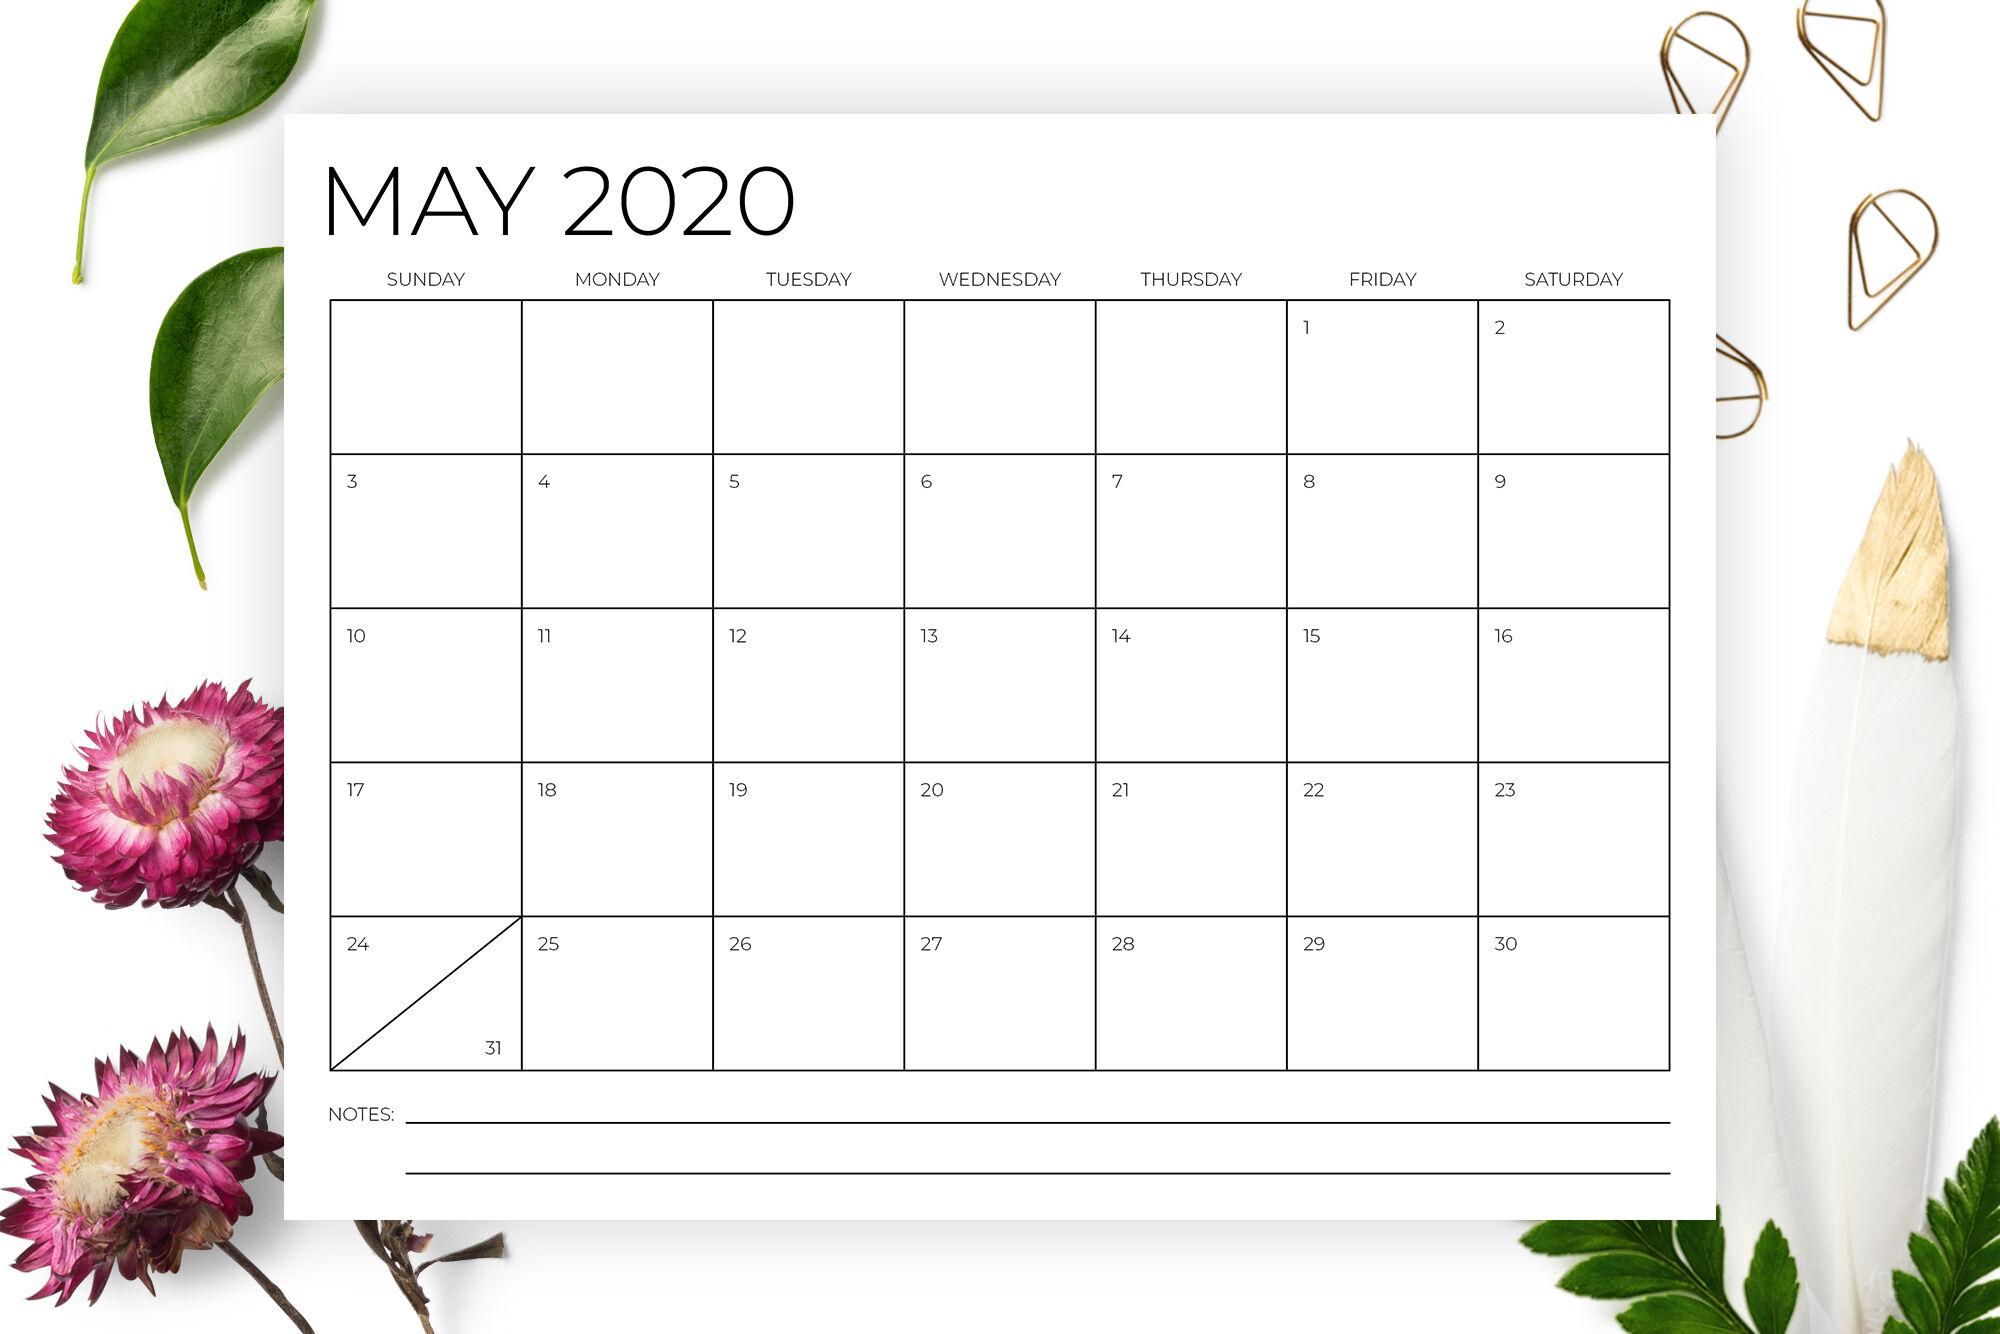 8 5 x 11 inch minimal 2020 calendarrunning with foxes